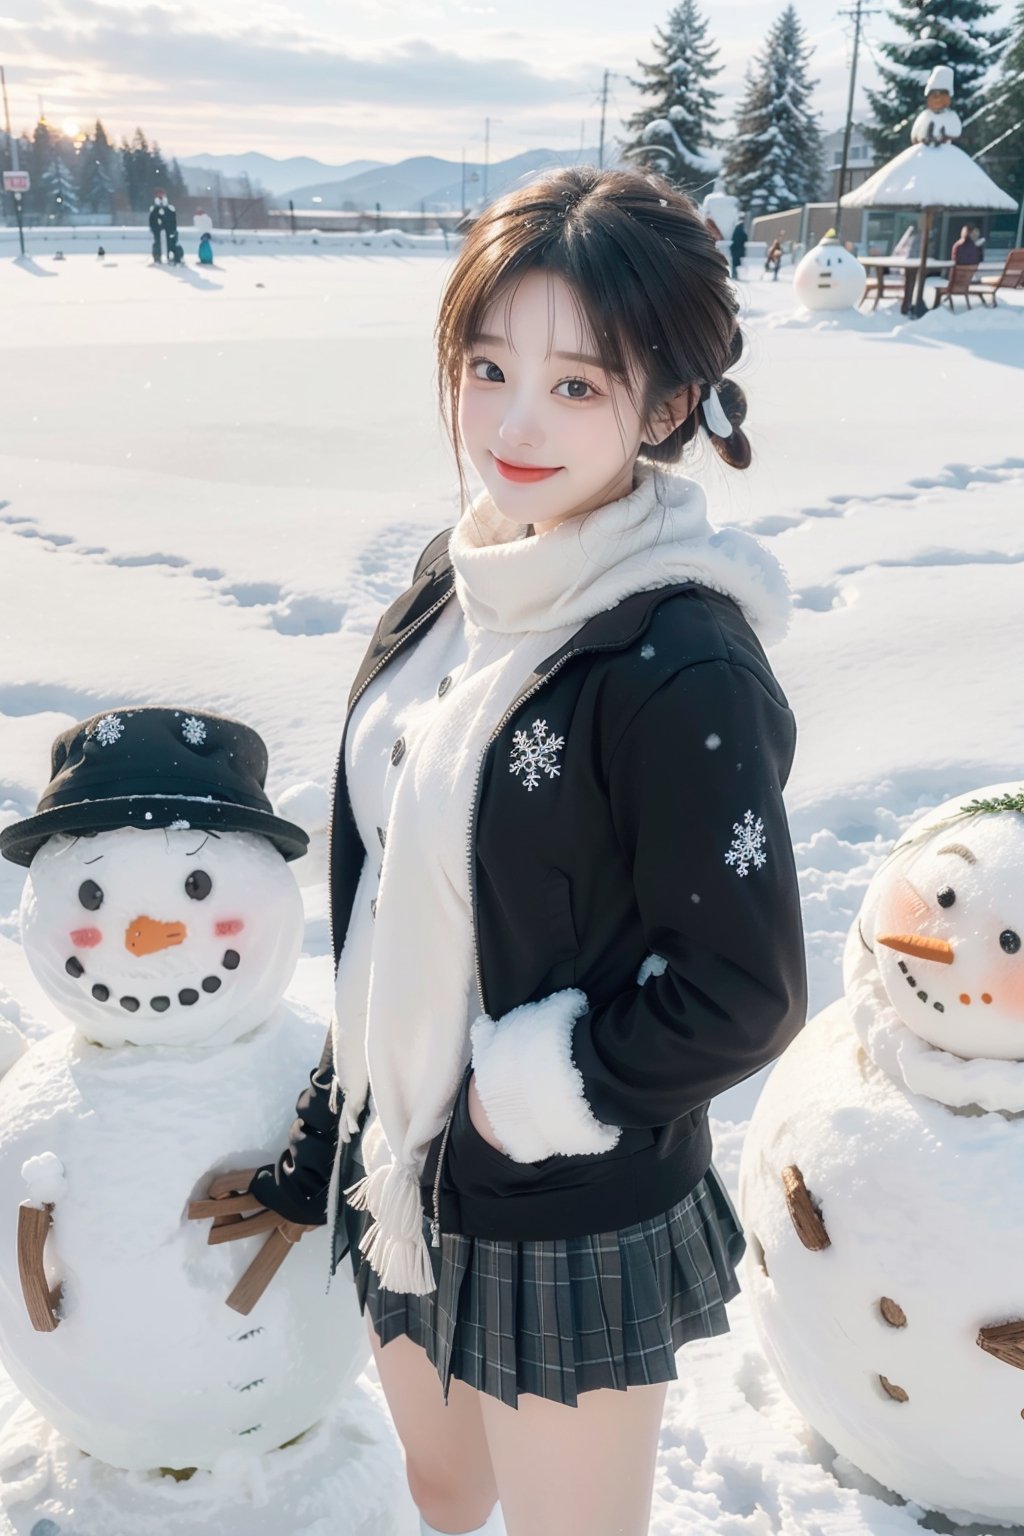 (Best quality, Masterpiece: 1.3), Perfect beauty: 1. 5, yui yuigahama, short hair, single hair bun, school uniform, black jacket, open jacket, ribbon, collared shirt, plaid skirt,(Smiling), (Very beautiful view), (Most amazing view), (One woman), ( Snow scene), (Plain background), Making snowman, One person, Small chest, Hair in wind Fluttering skirt, Fluffy mitten gloves, earmuffs, scarf, cute snowman, best smile, waving, mini character, three snowmen, jumping snowman, ((hugging snowman)), shovel, penguin,soojin,